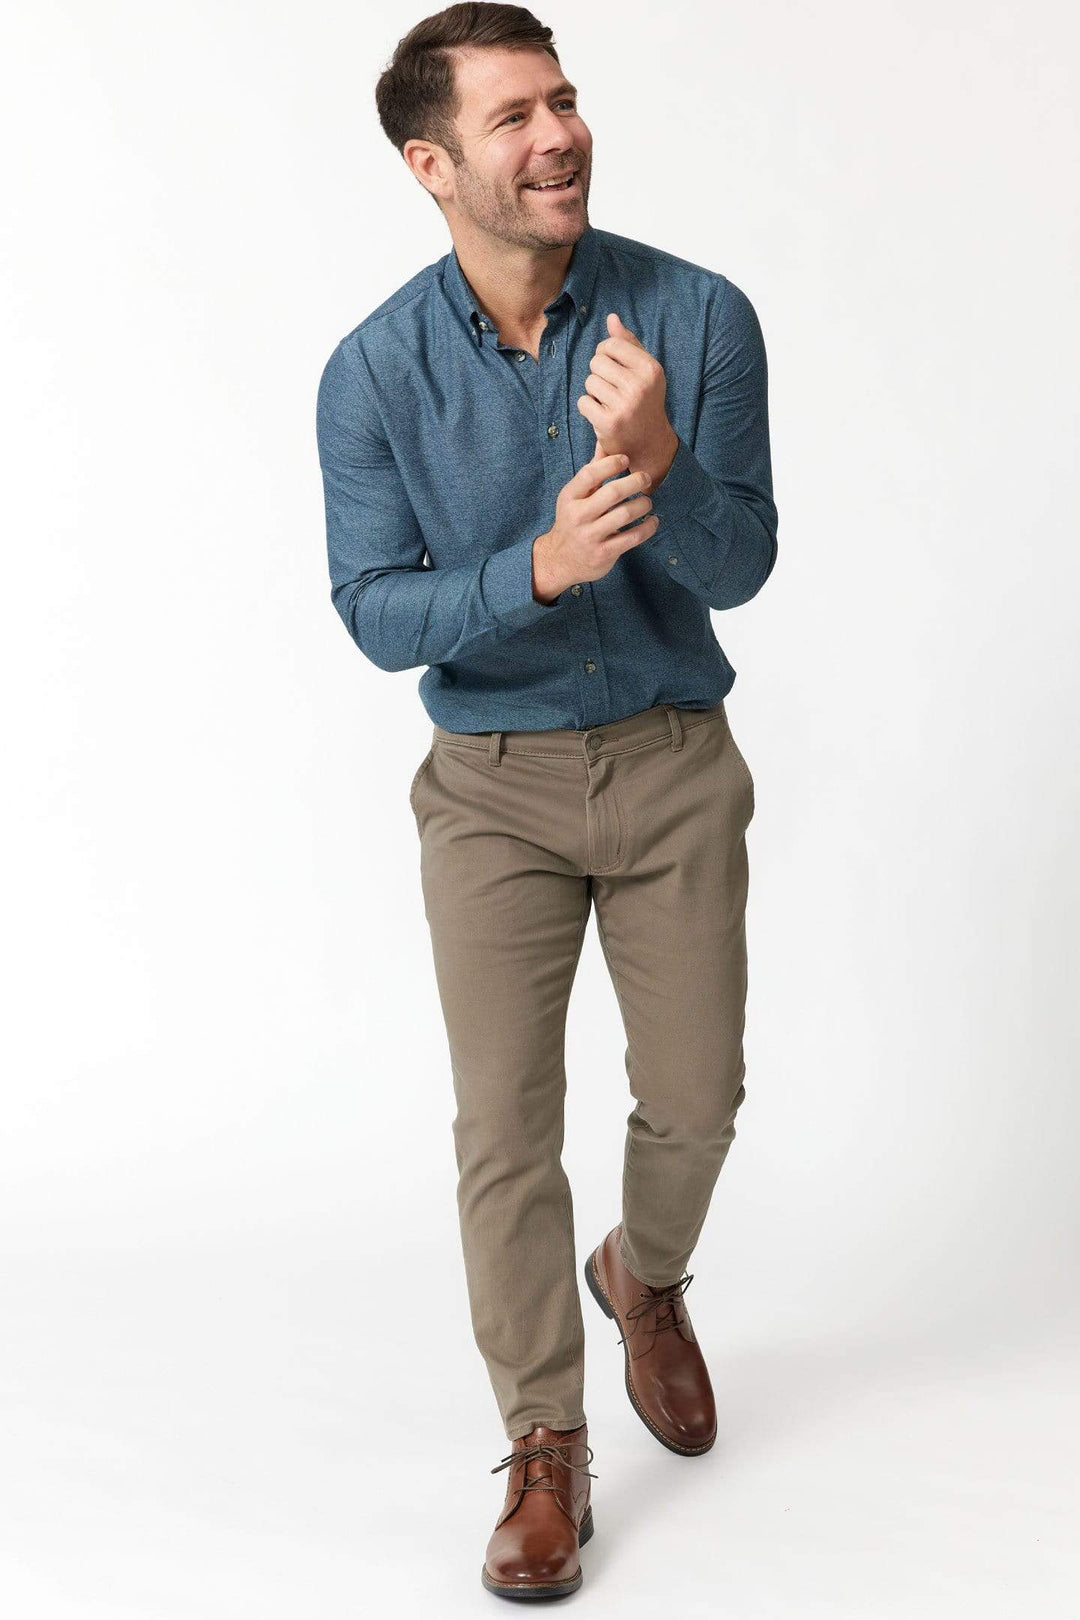 Buy Driftwood Lightweight Stretch Chinos for Short Men | Ash & Erie   Chino Pants